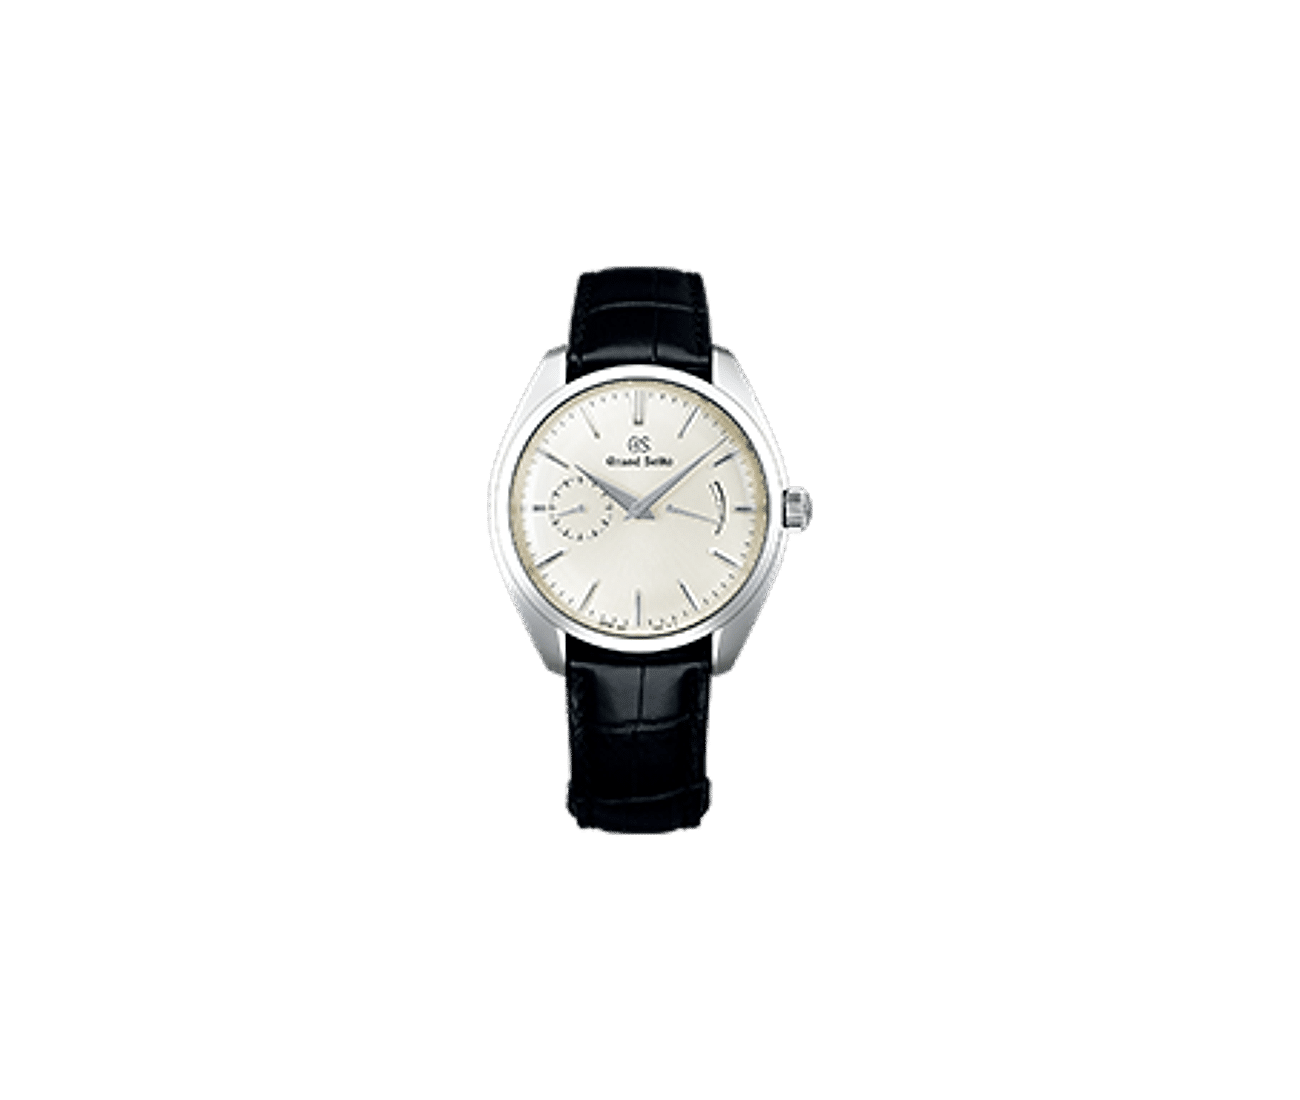 Slim Manual Winding Caliber with 72 hours power reserve